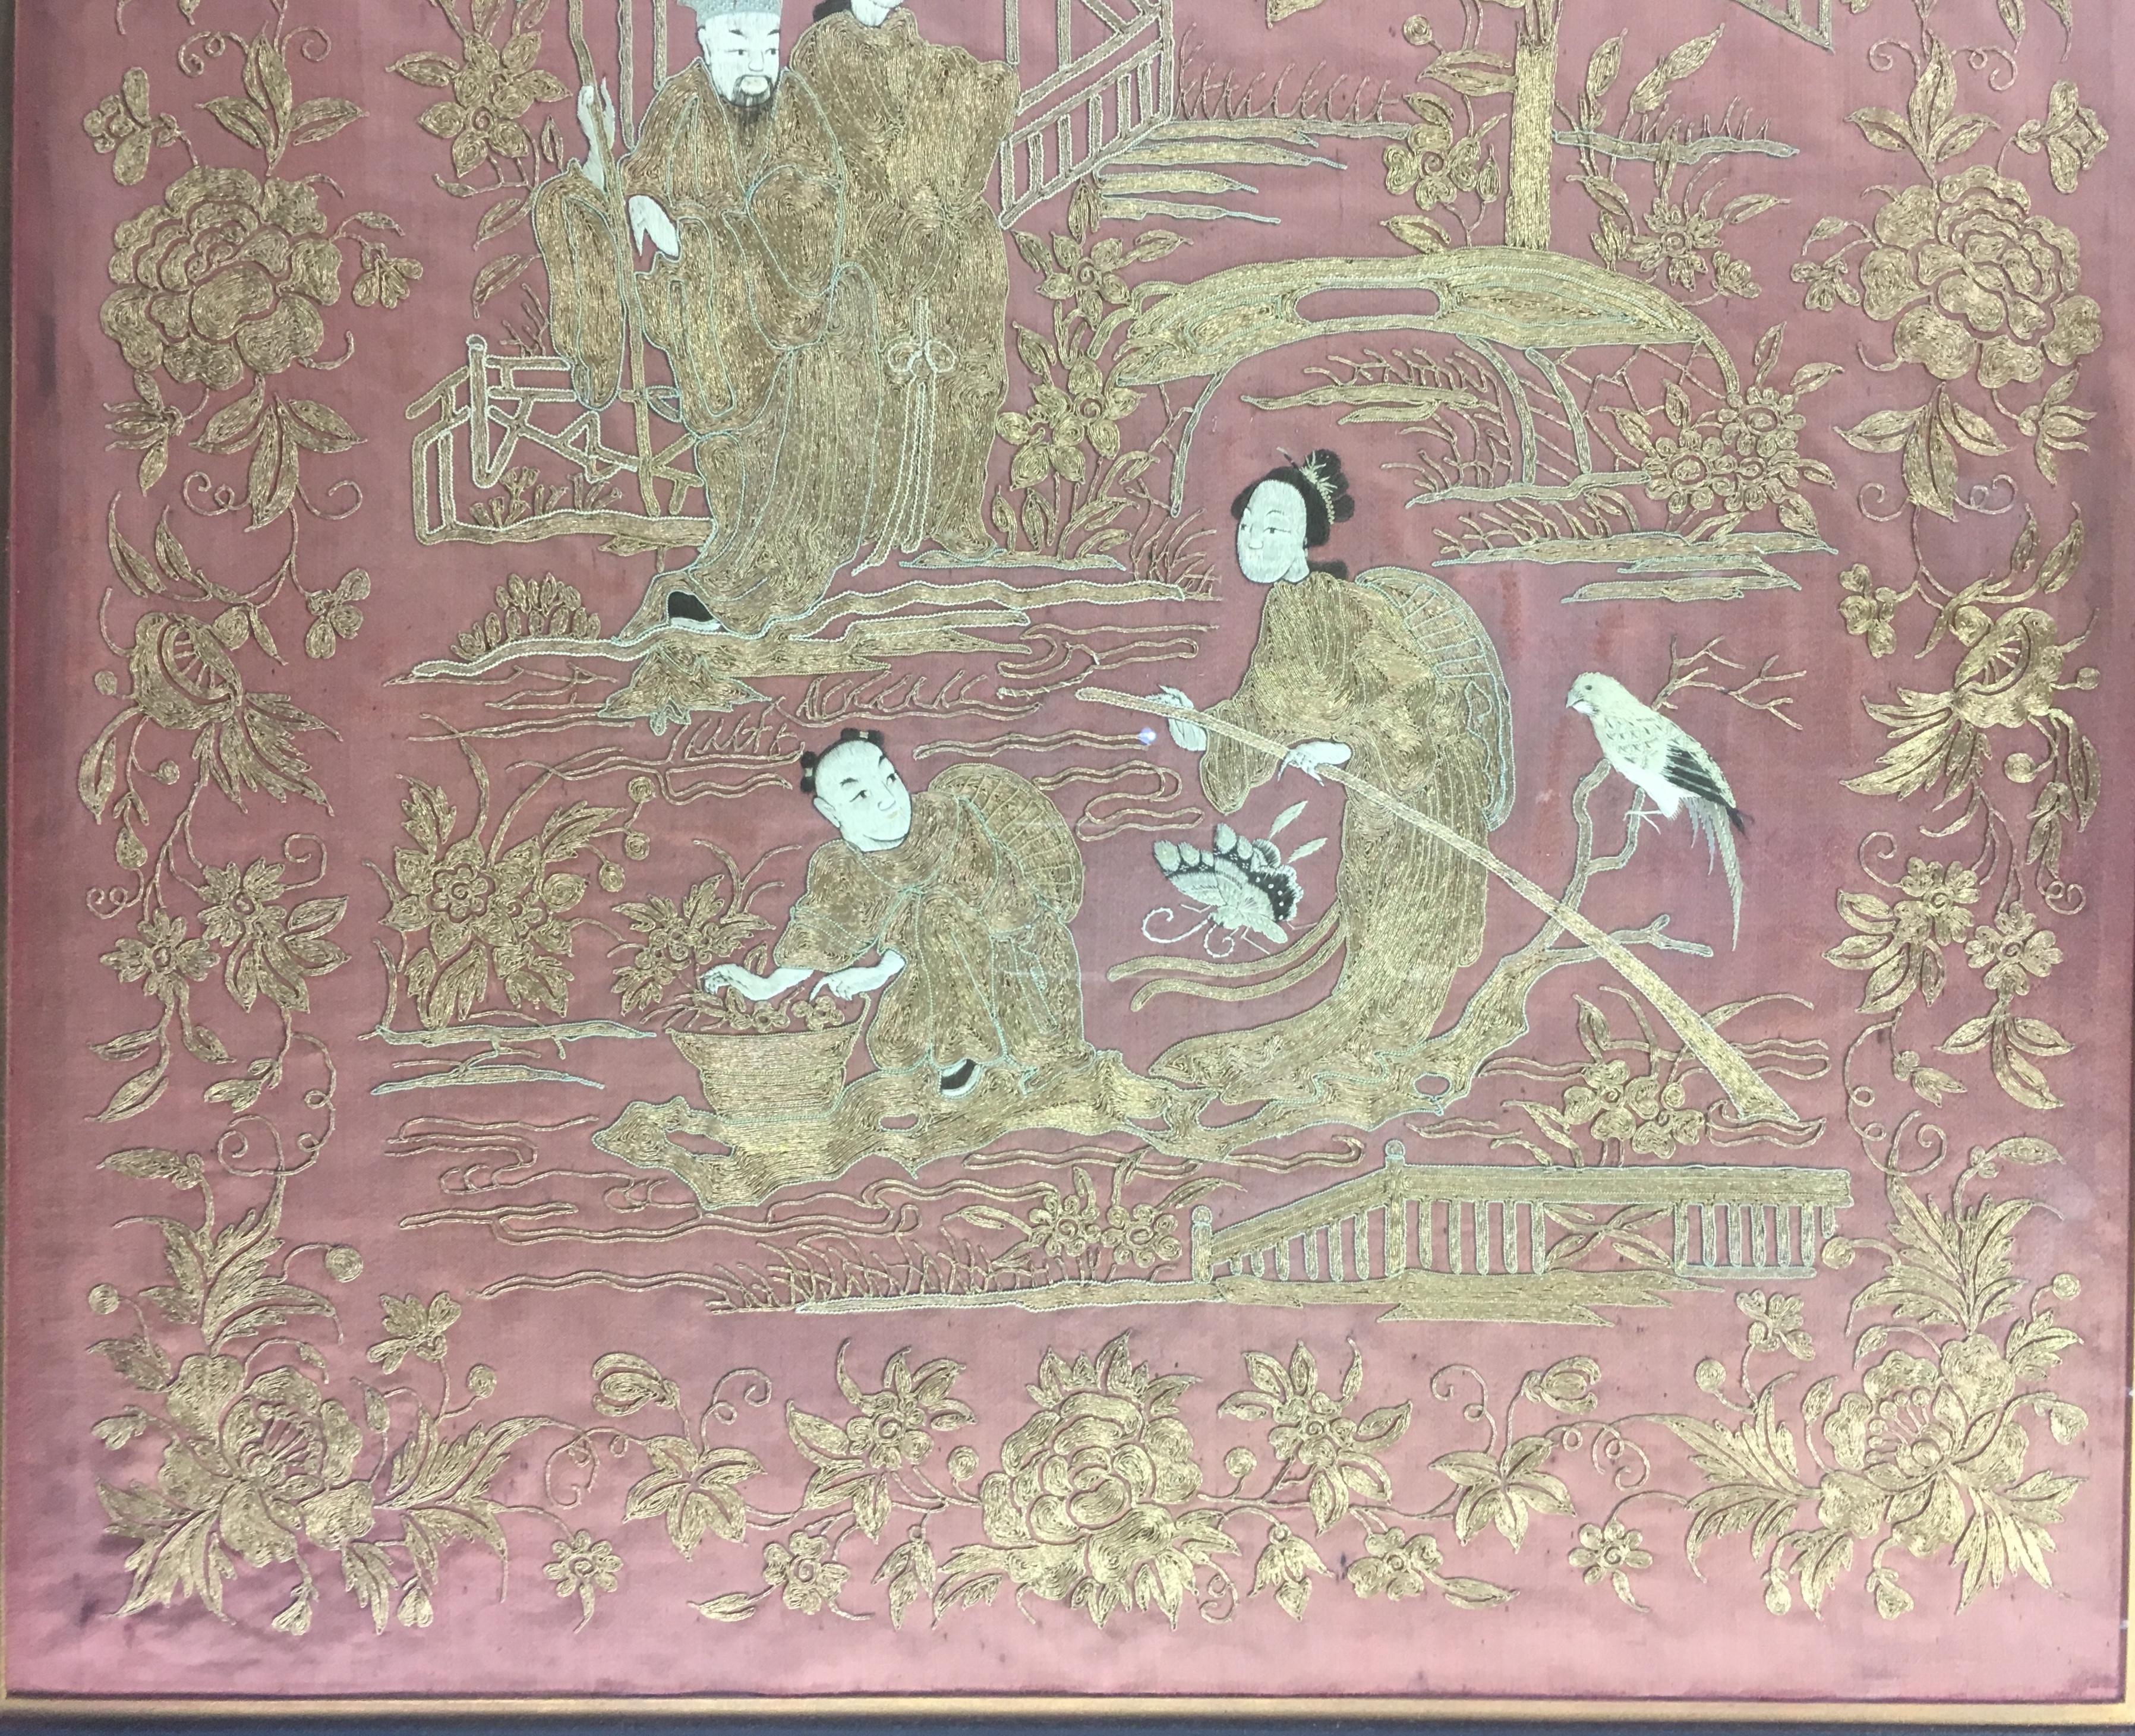 Hand embroidered framed wall tapestry with striking red silk fabric and contrasting golden thread. Depicting everyday life celebrations with multiple figures, iconic Chinese style architecture and birds. Professionally framed under glass with